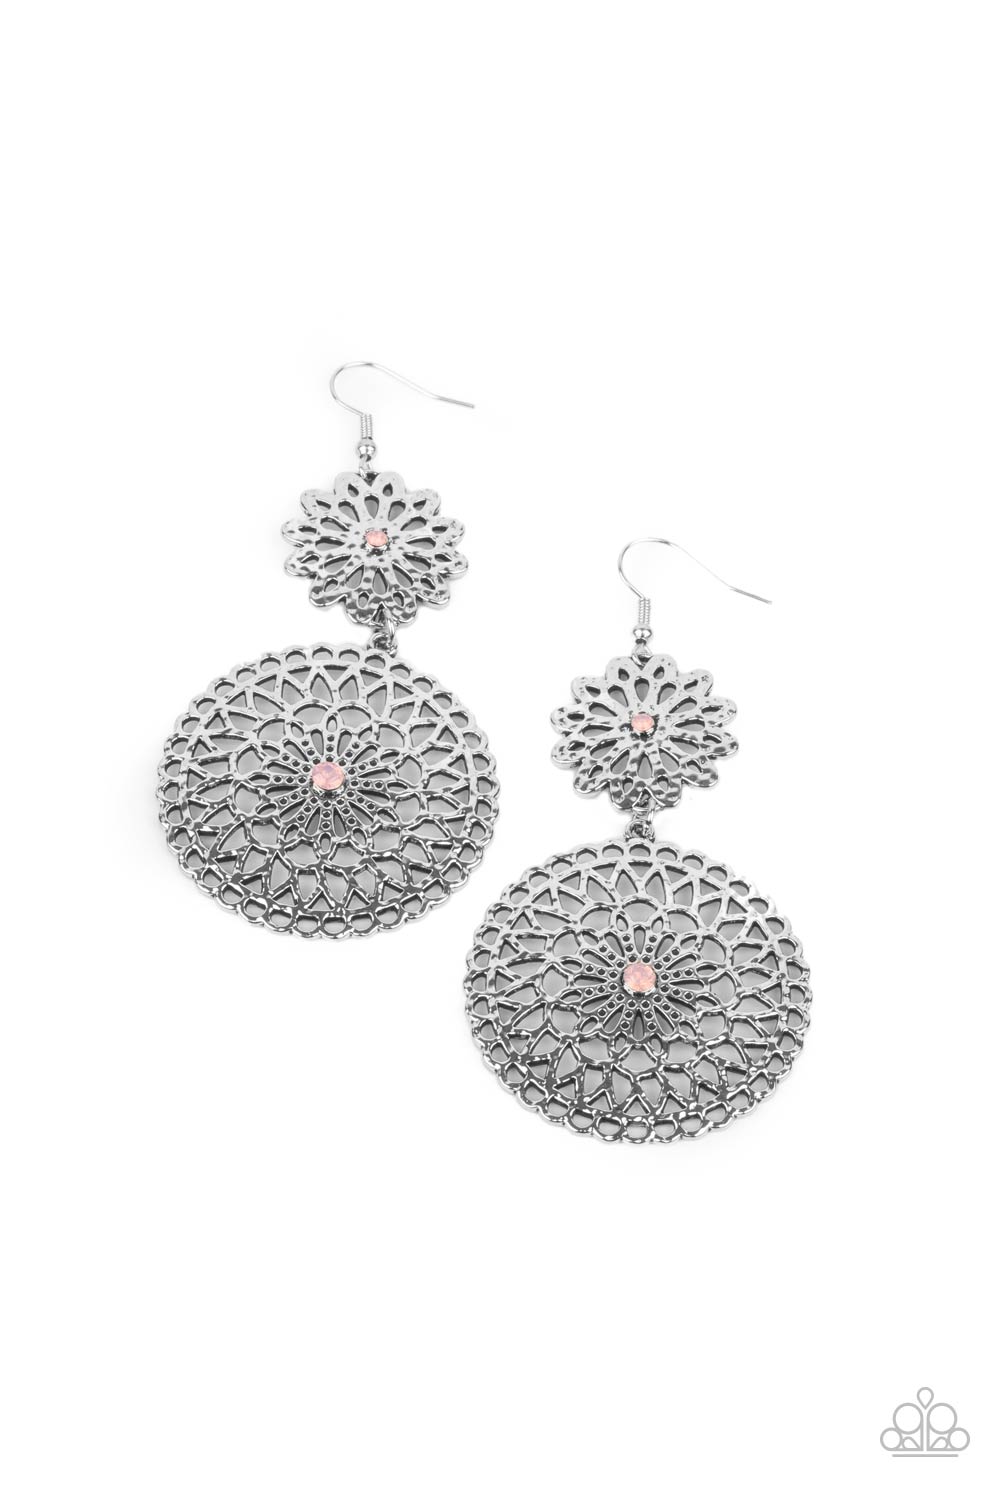 Paparazzi Accessories Garden Mantra - Pink Earrings - Lady T Accessories